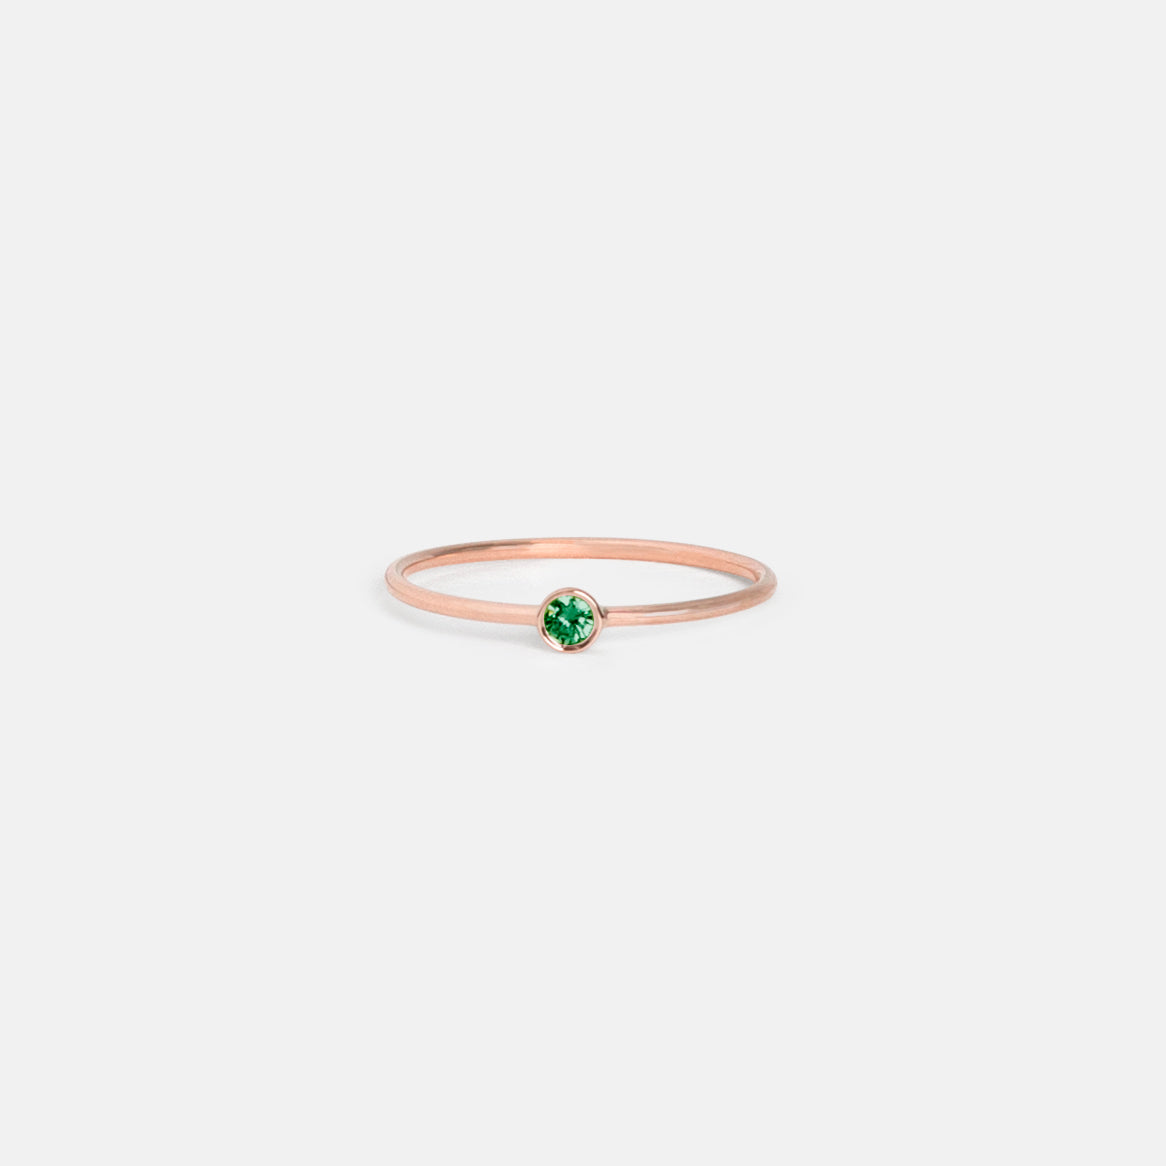 Minimalist Large Kaya Ring in 14k Rose Gold set with Emerald by SHW Fine Jewelry in NYC